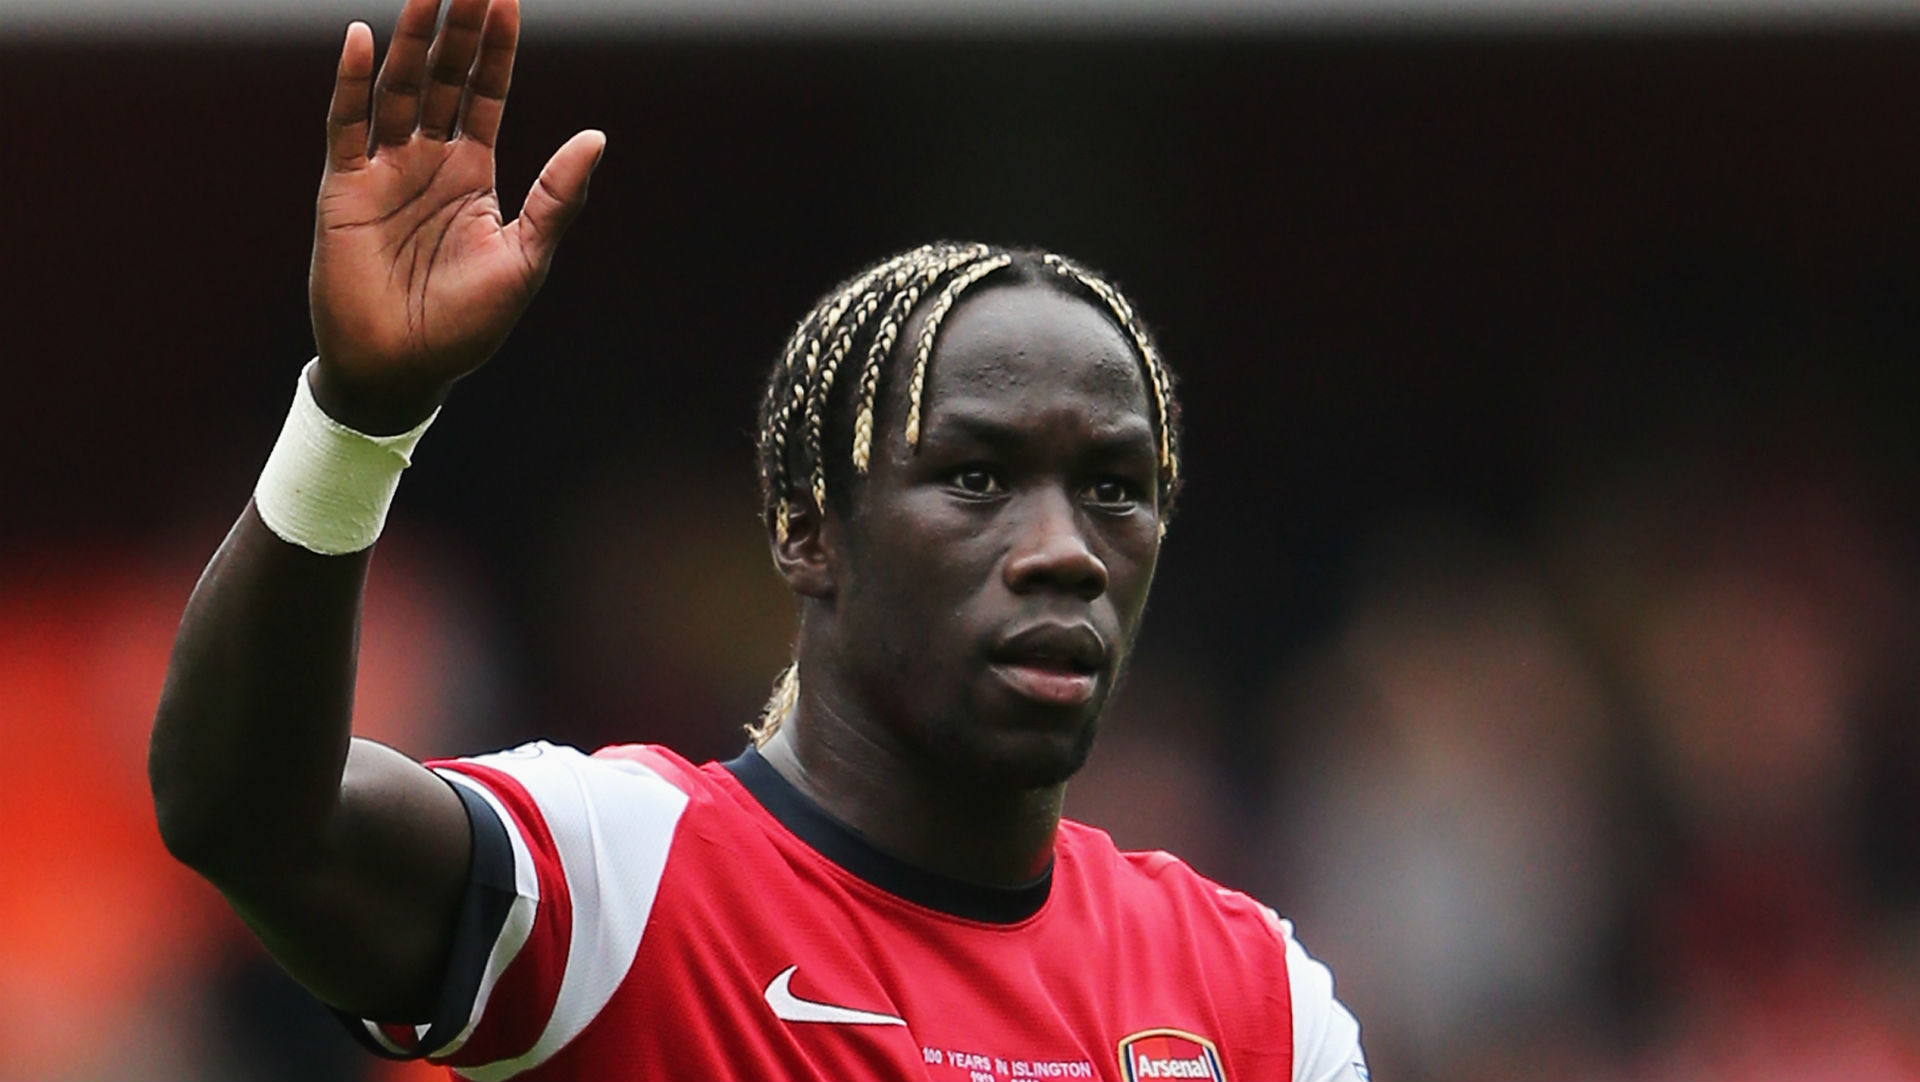 'I felt like a robot' - Ex-Arsenal defender Sagna on suffering serious injury after brother's death